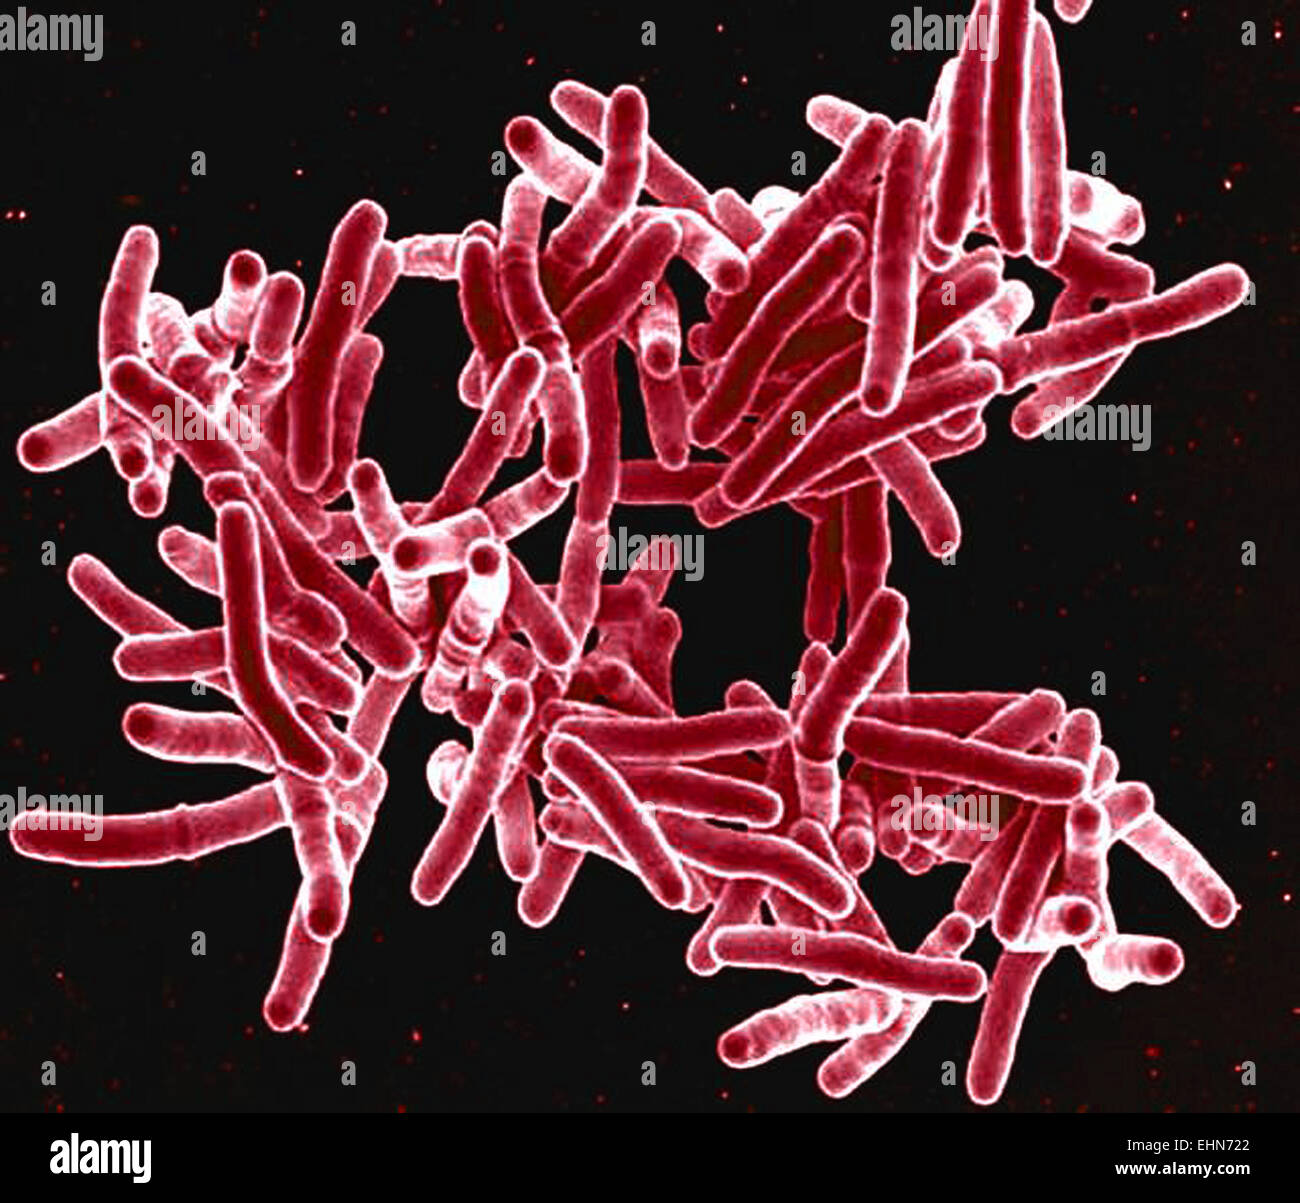 Mycobacterium tuberculosis bacteria, These Gram-positive rod-shaped bacteria cause the disease tuberculosis, colorized scanning electron micrograph (SEM). Stock Photo